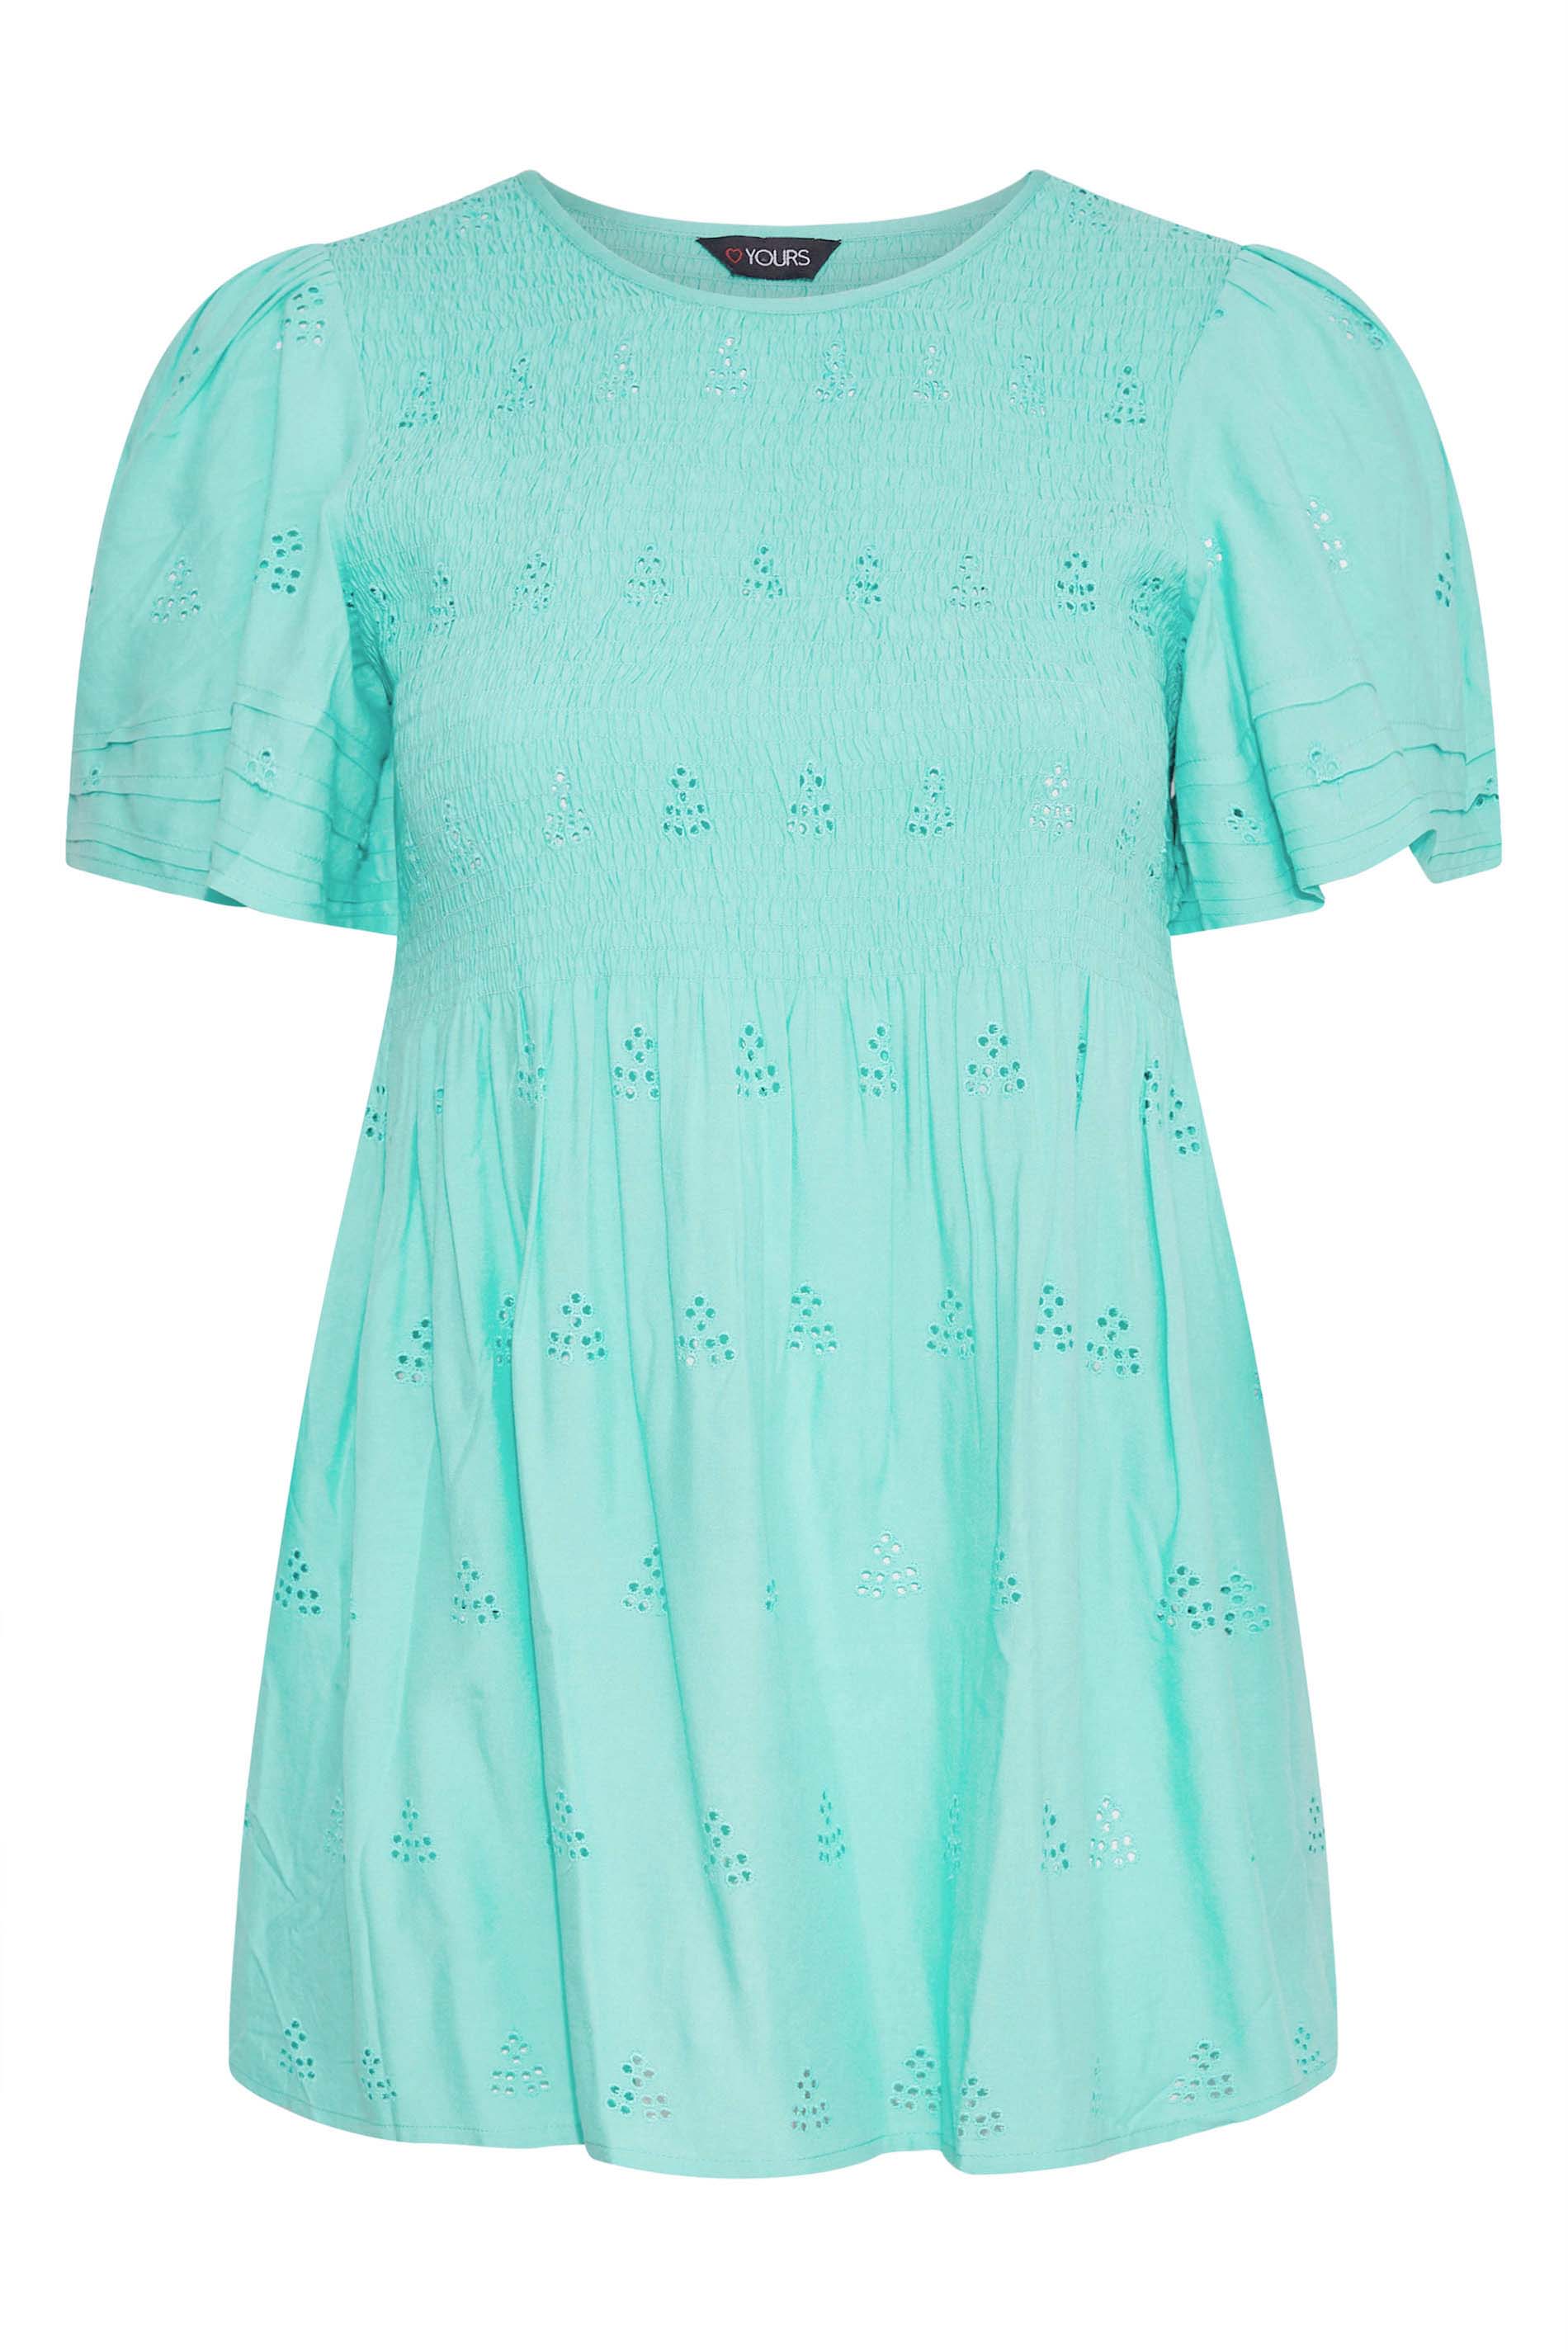 Grande taille  Tops Grande taille  Blouses & Chemisiers | LIMITED COLLECTION - Top Bleu-Vert Design Brodé - PU34412